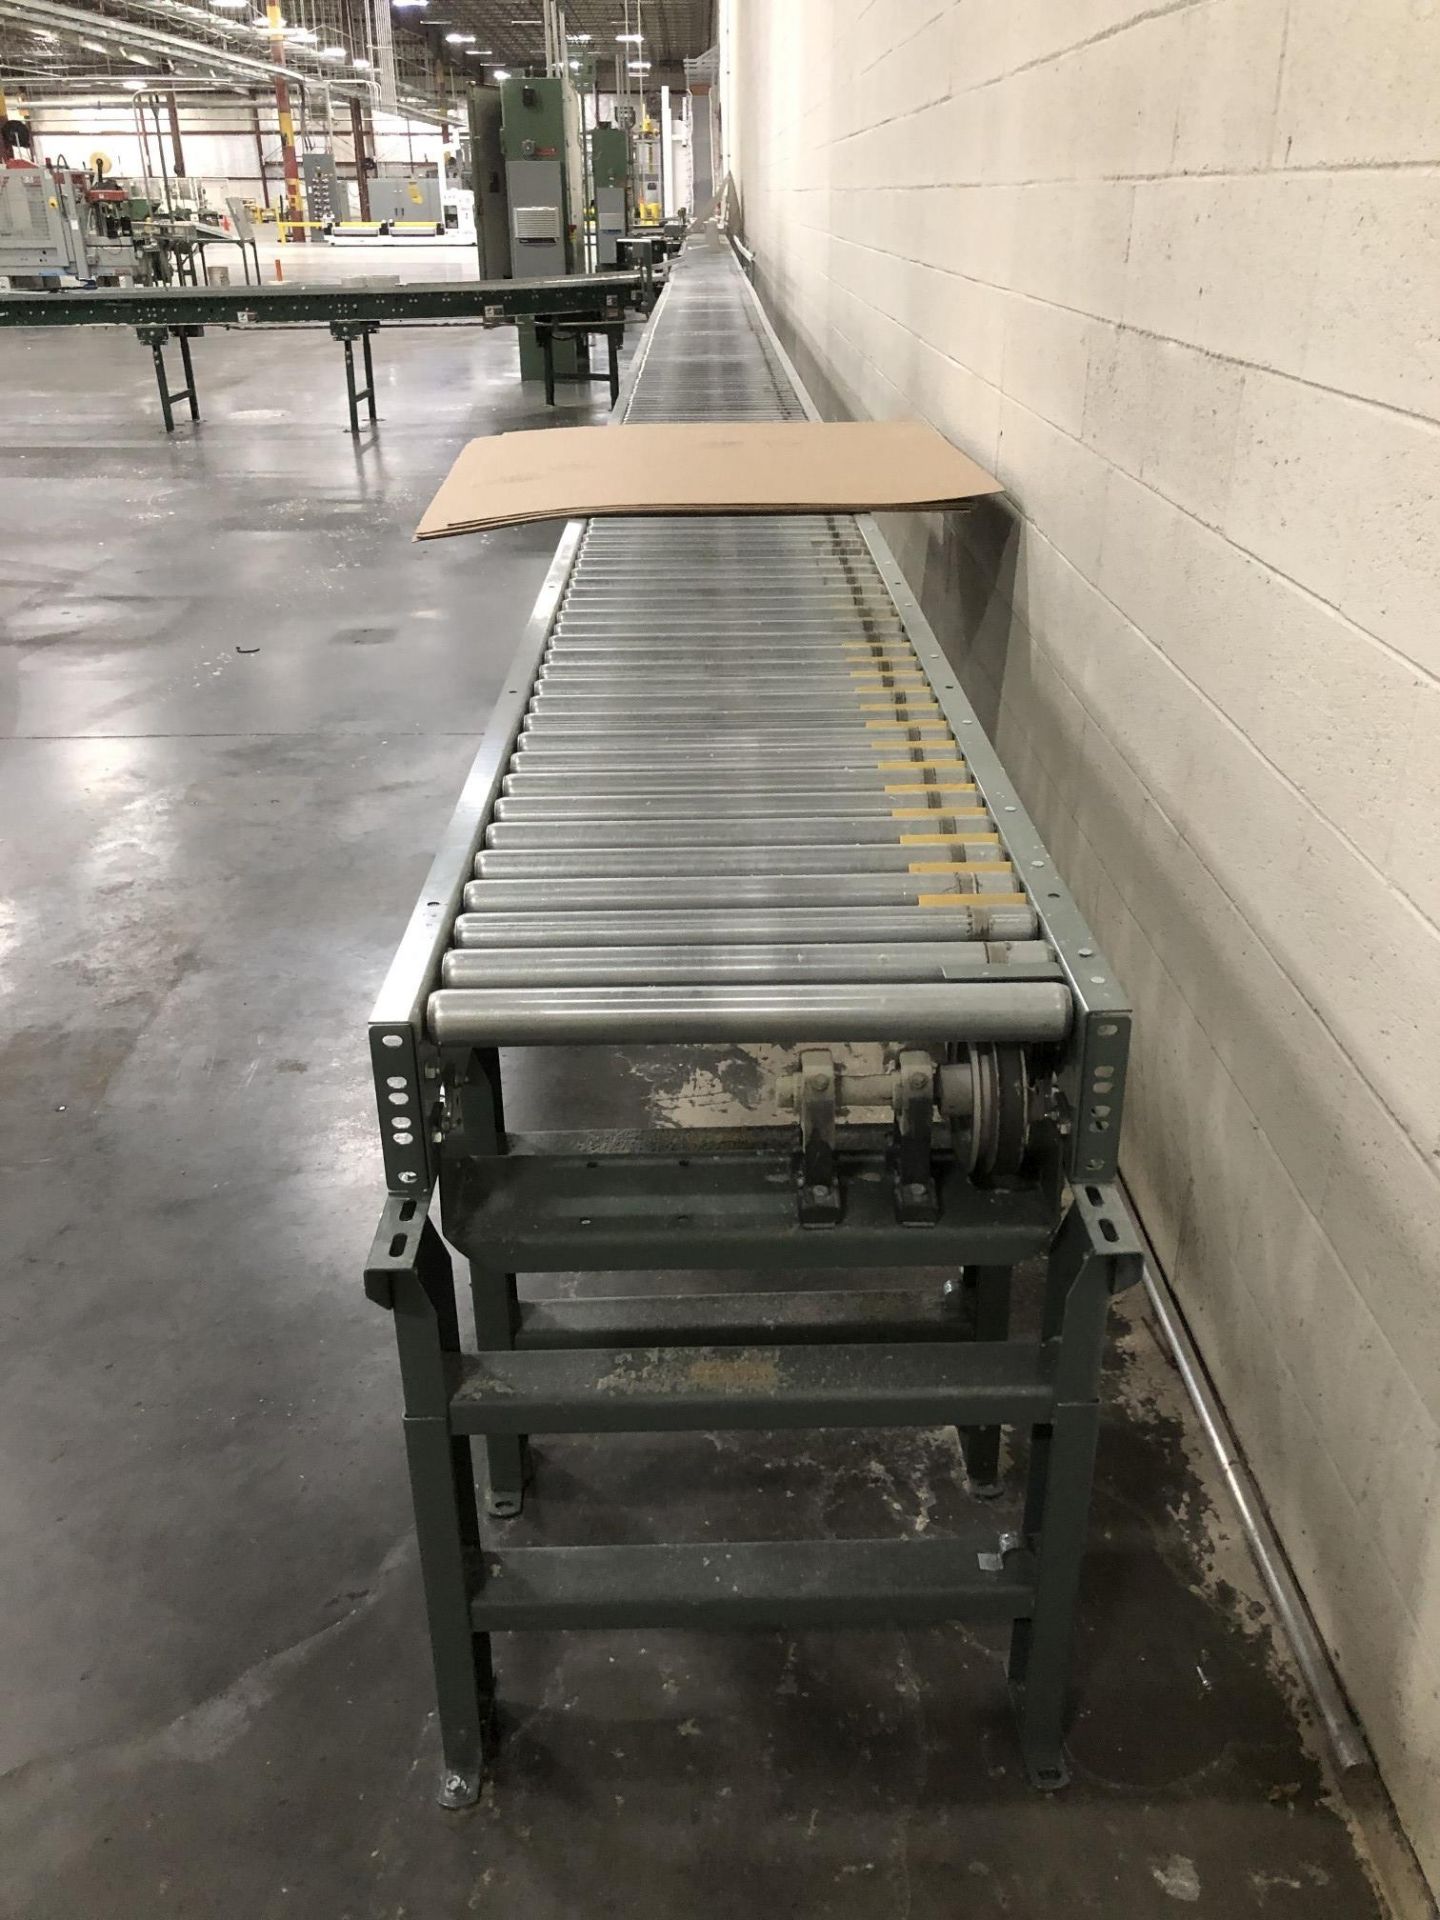 All Hytrol Conveyor Throughout Entire Site, Mostly 20" Wide Powered Roller Conveyor [Please - Image 56 of 80